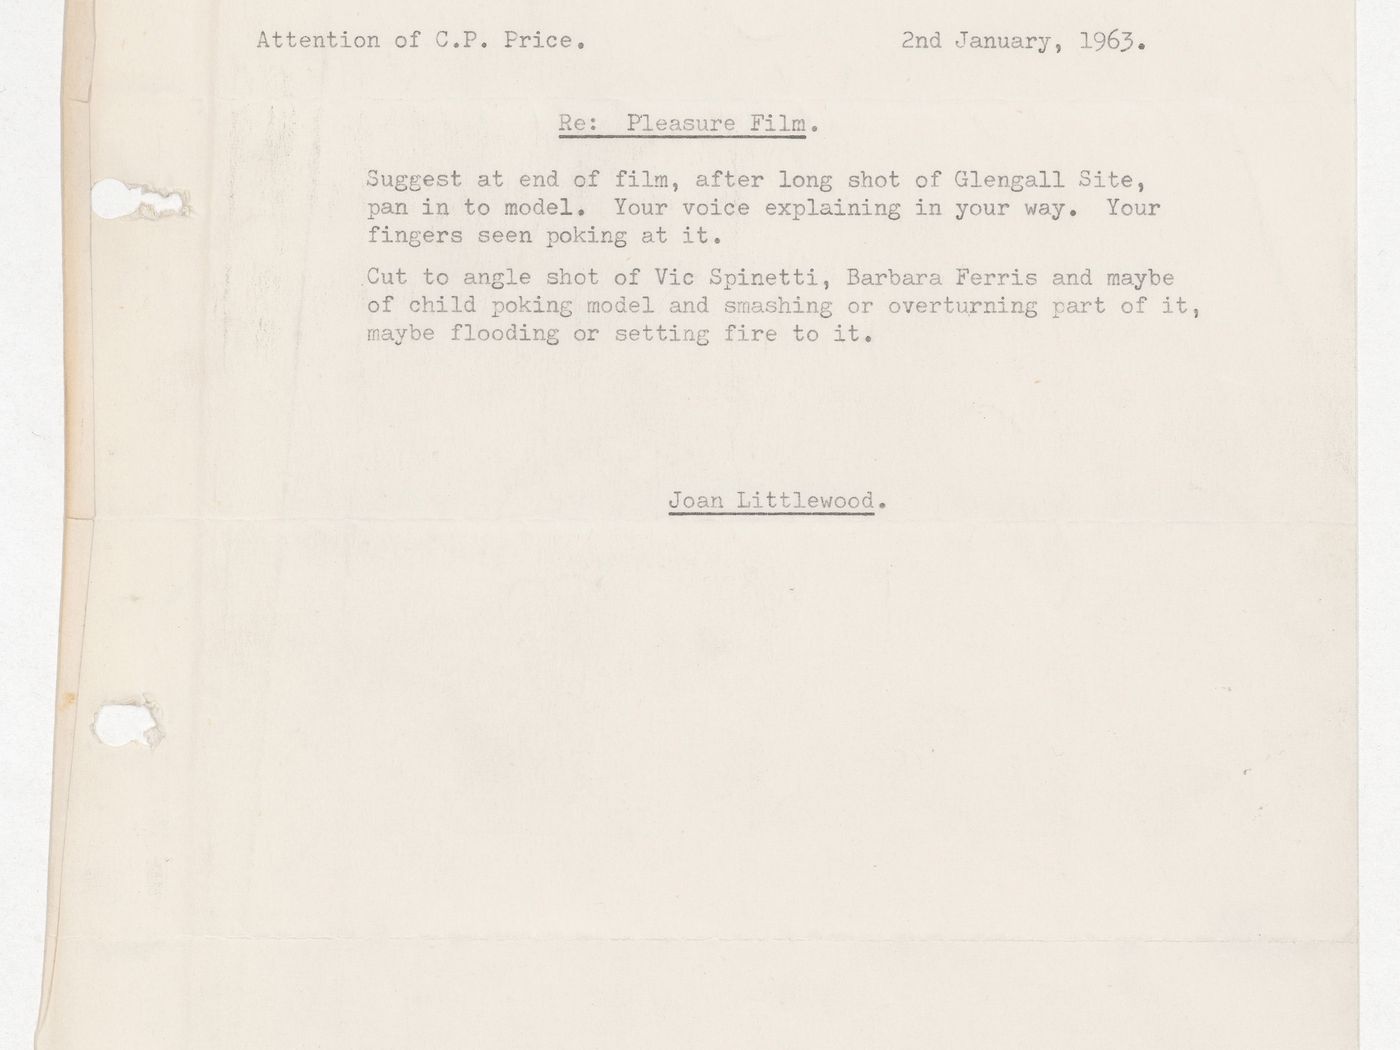 Letter from Joan Littlewood to Cedric Price regarding the Pleasure film